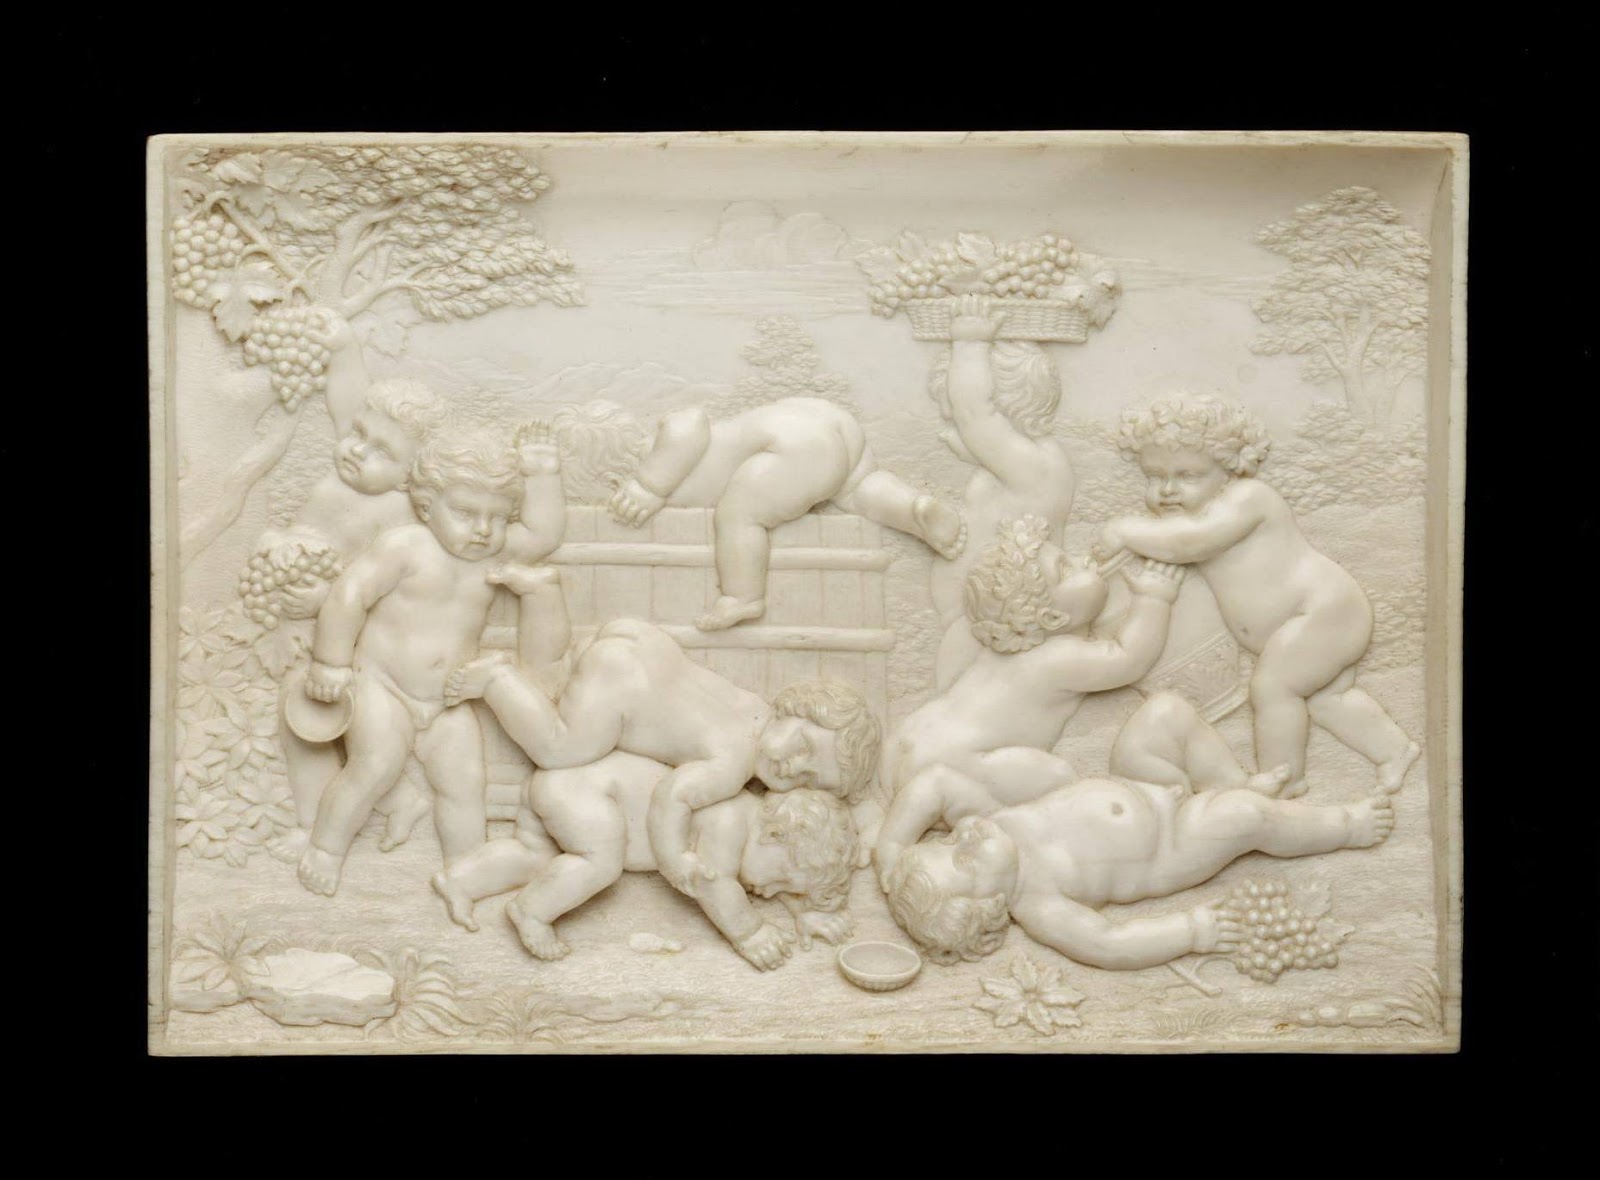 Duquesnoy-François-Bacchanalian-infants-playing-with-grapes-c1650-70-ivory-relief-V&A-Flemish.jpg